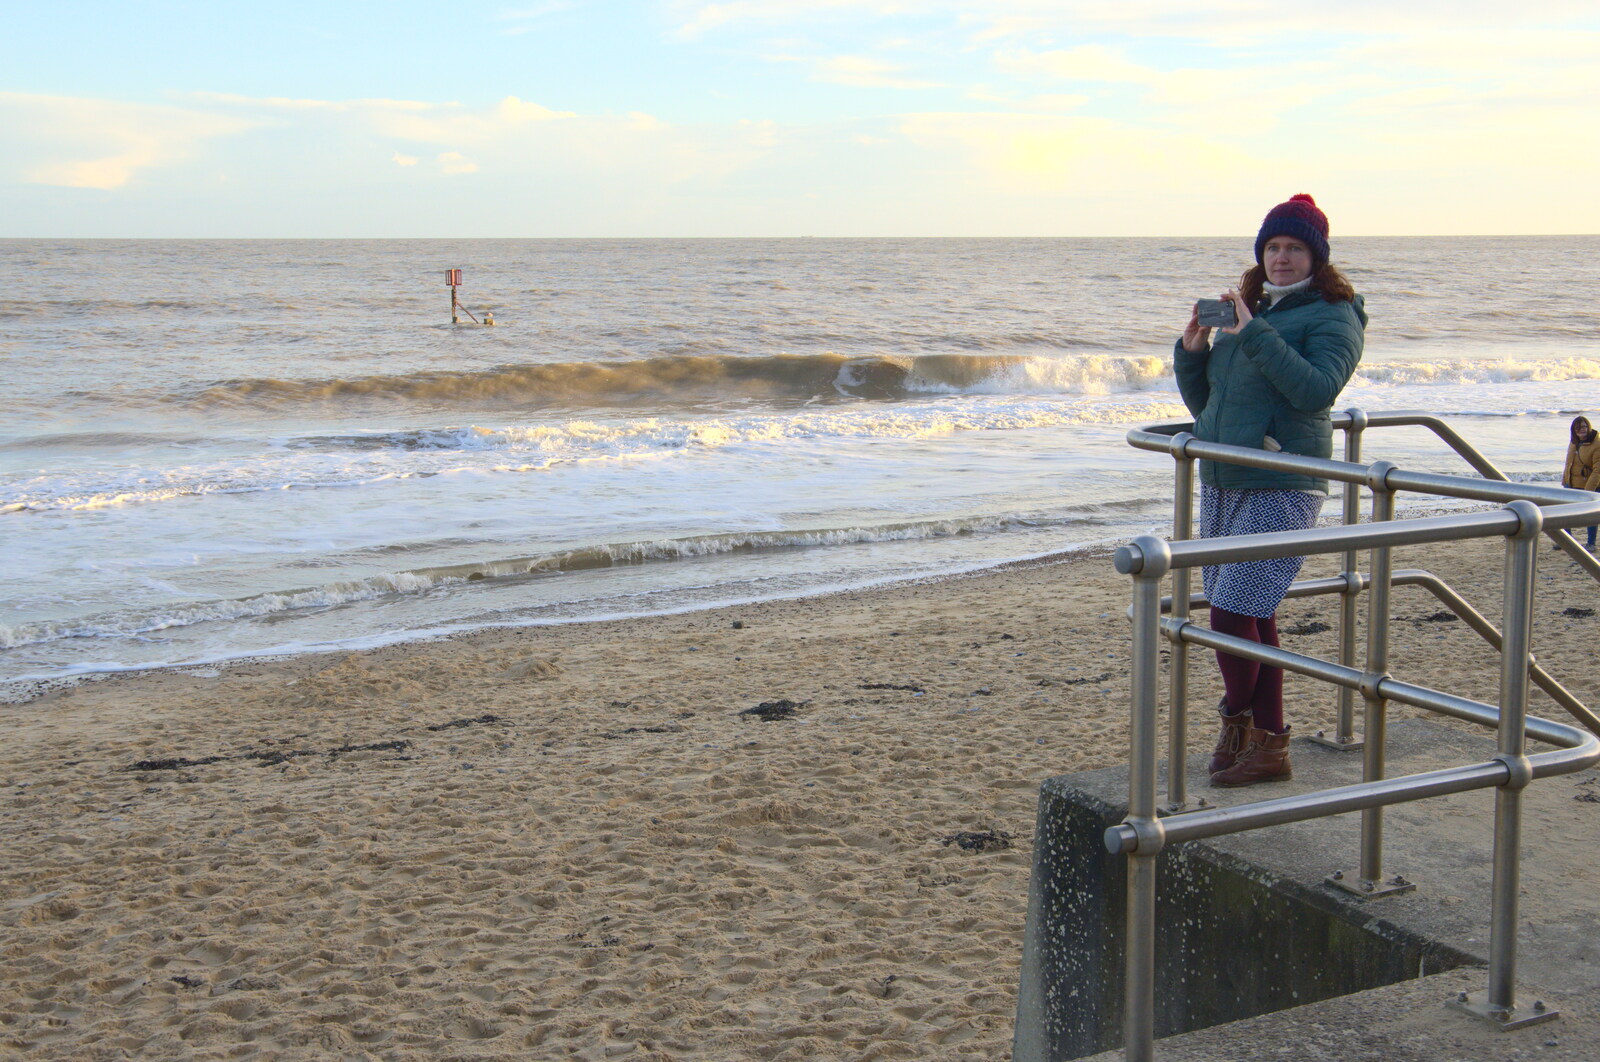 Isobel takes a video from A Return to the Beach, Southwold, Suffolk - 20th December 2020